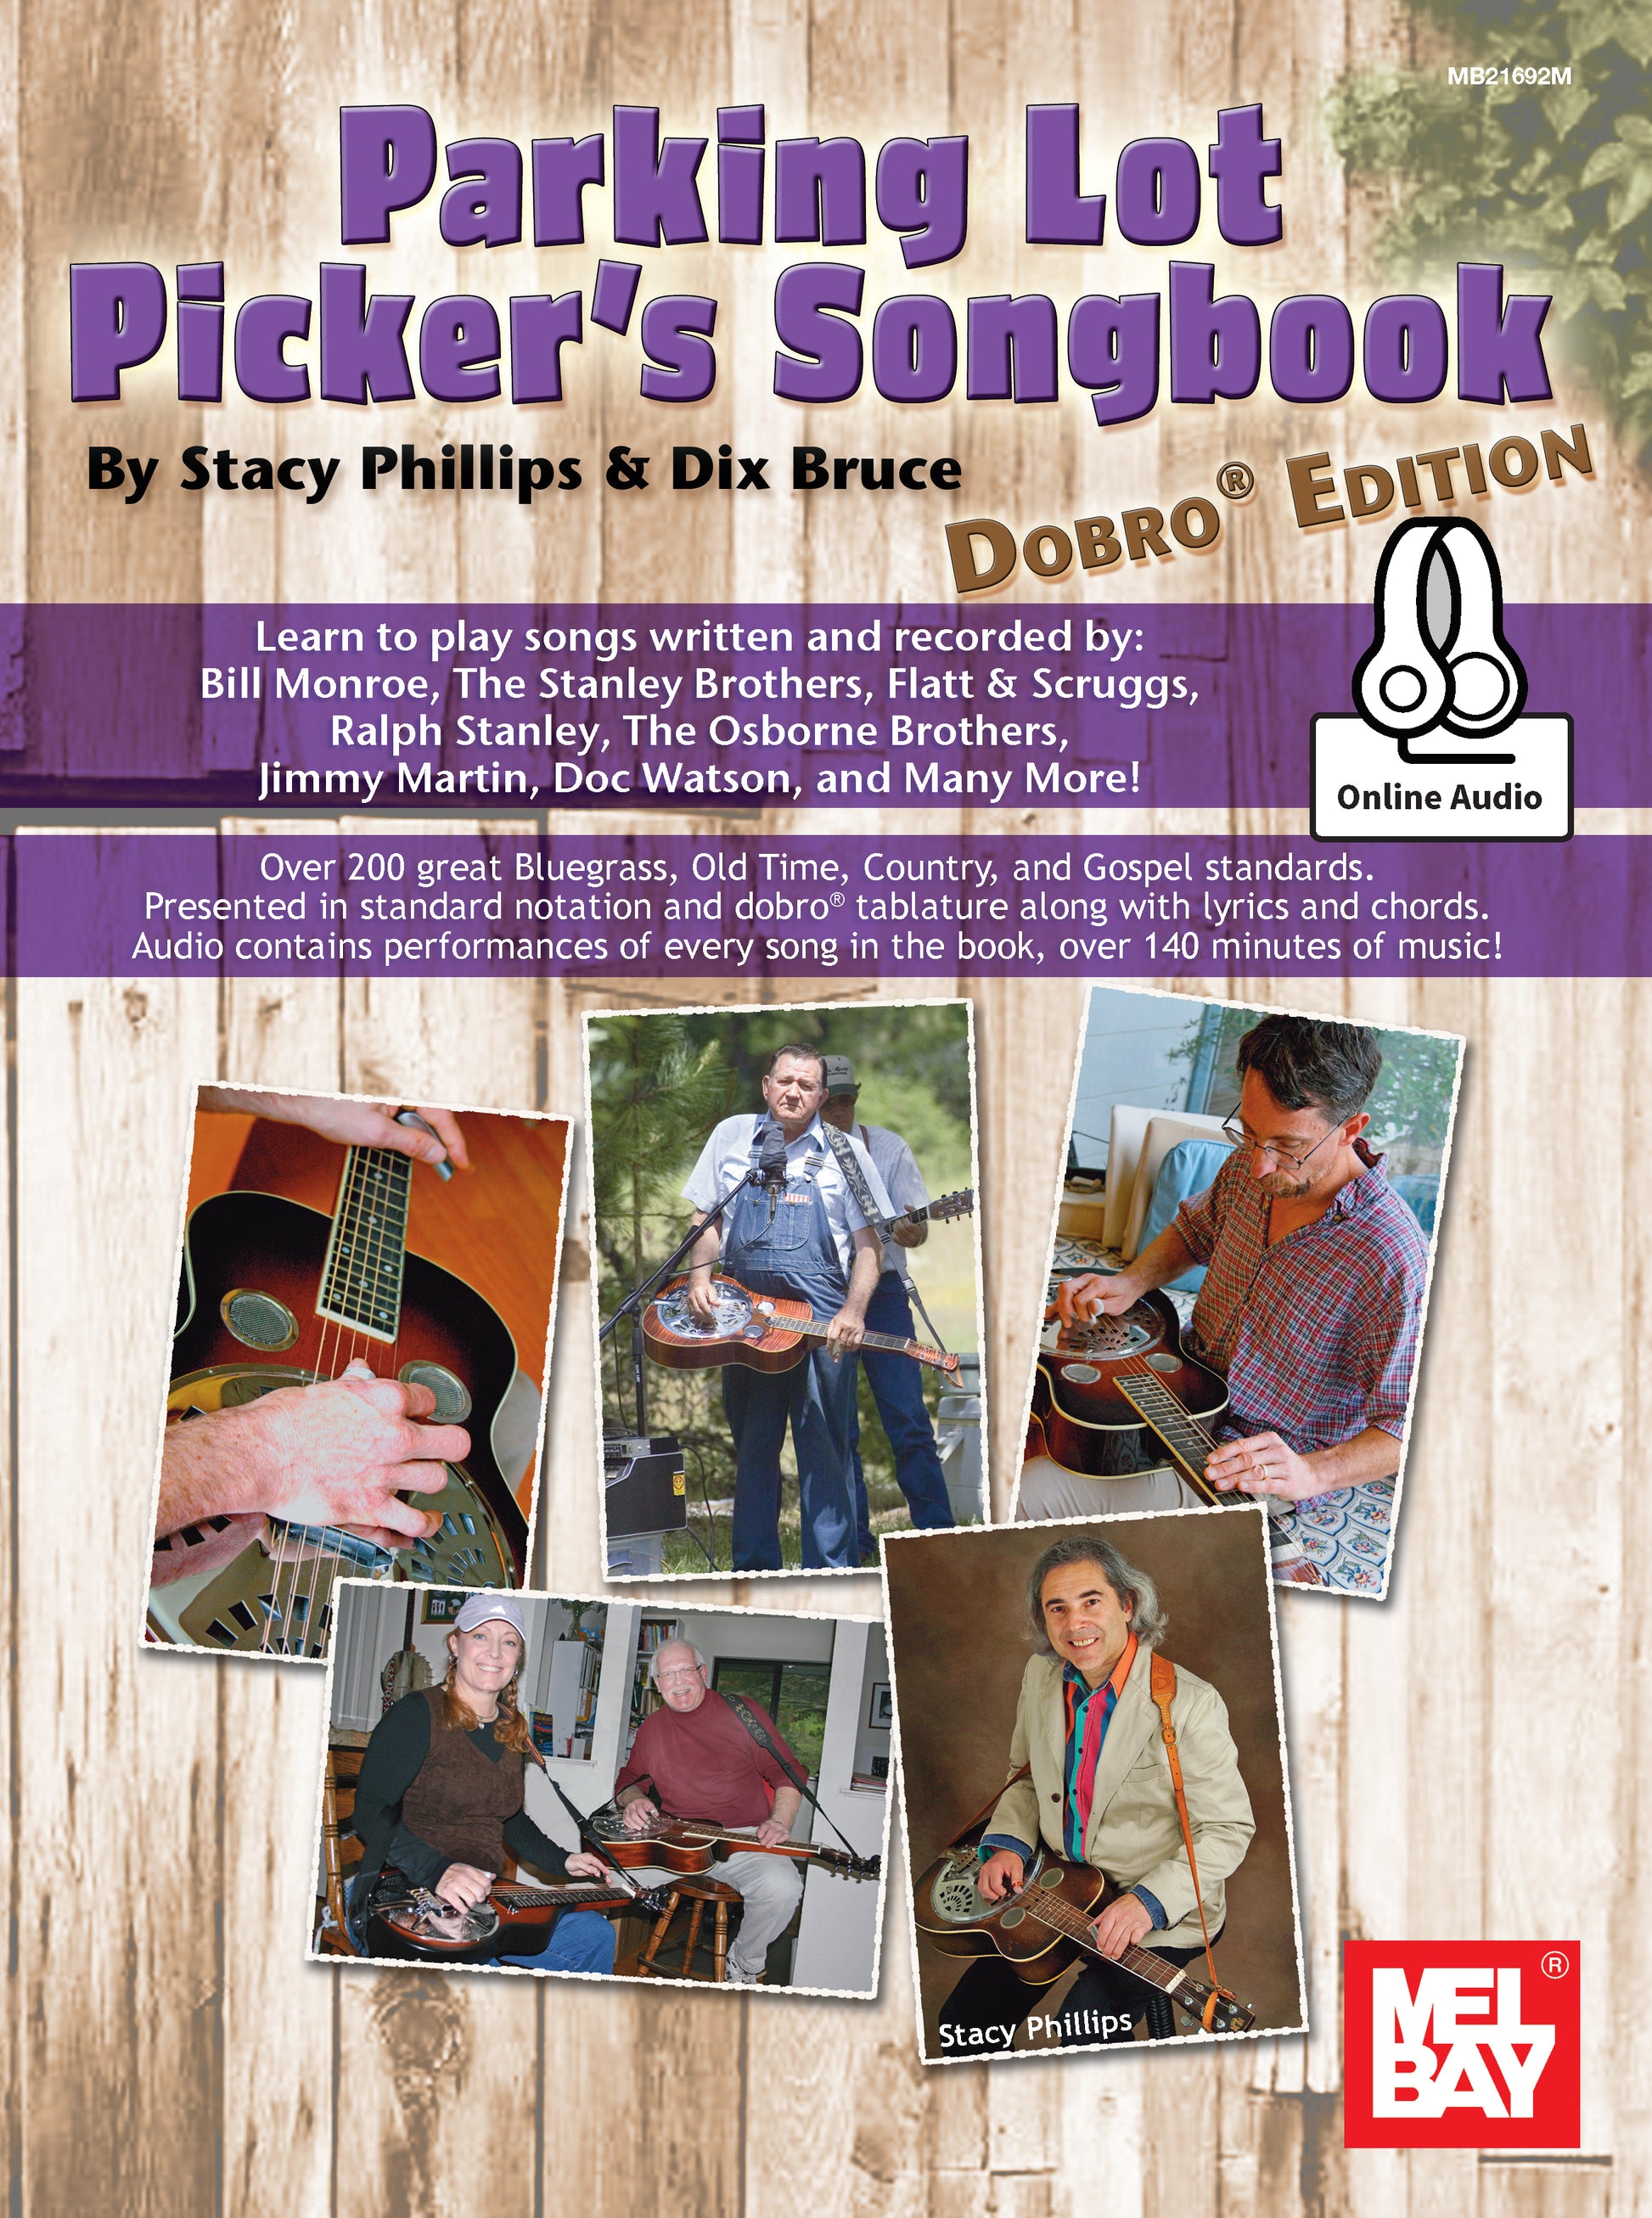 Parking Lot Pickers Songbook - Dobro